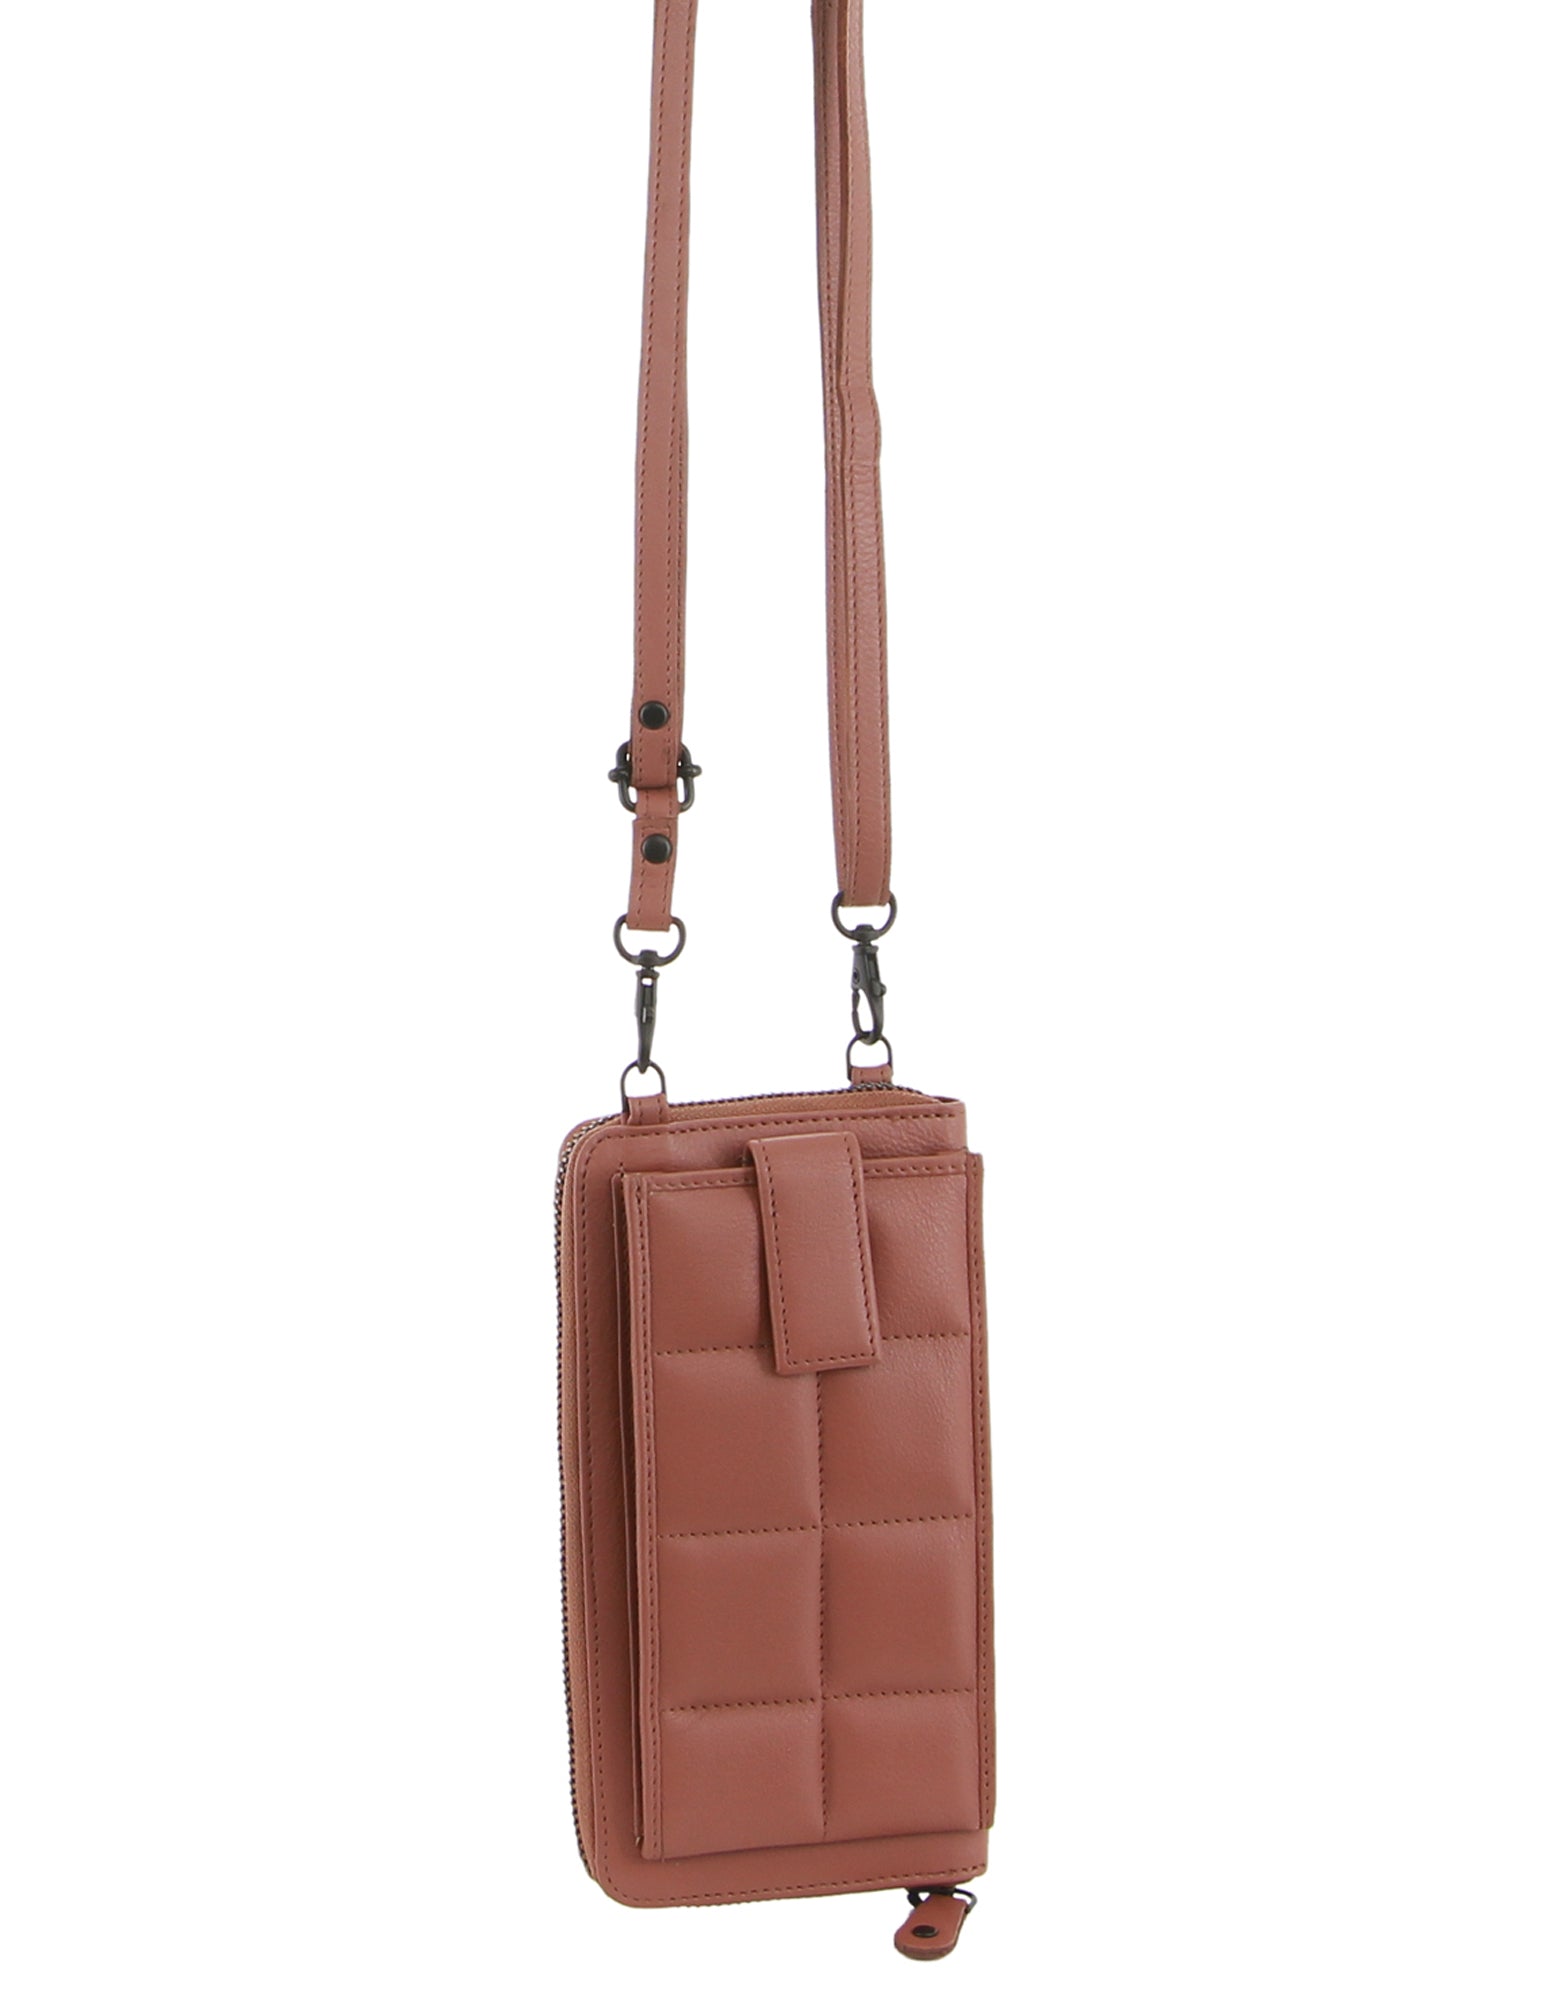 Pierre Cardin Quilted Leather Ladies Phone/Wallet Bag in Rose